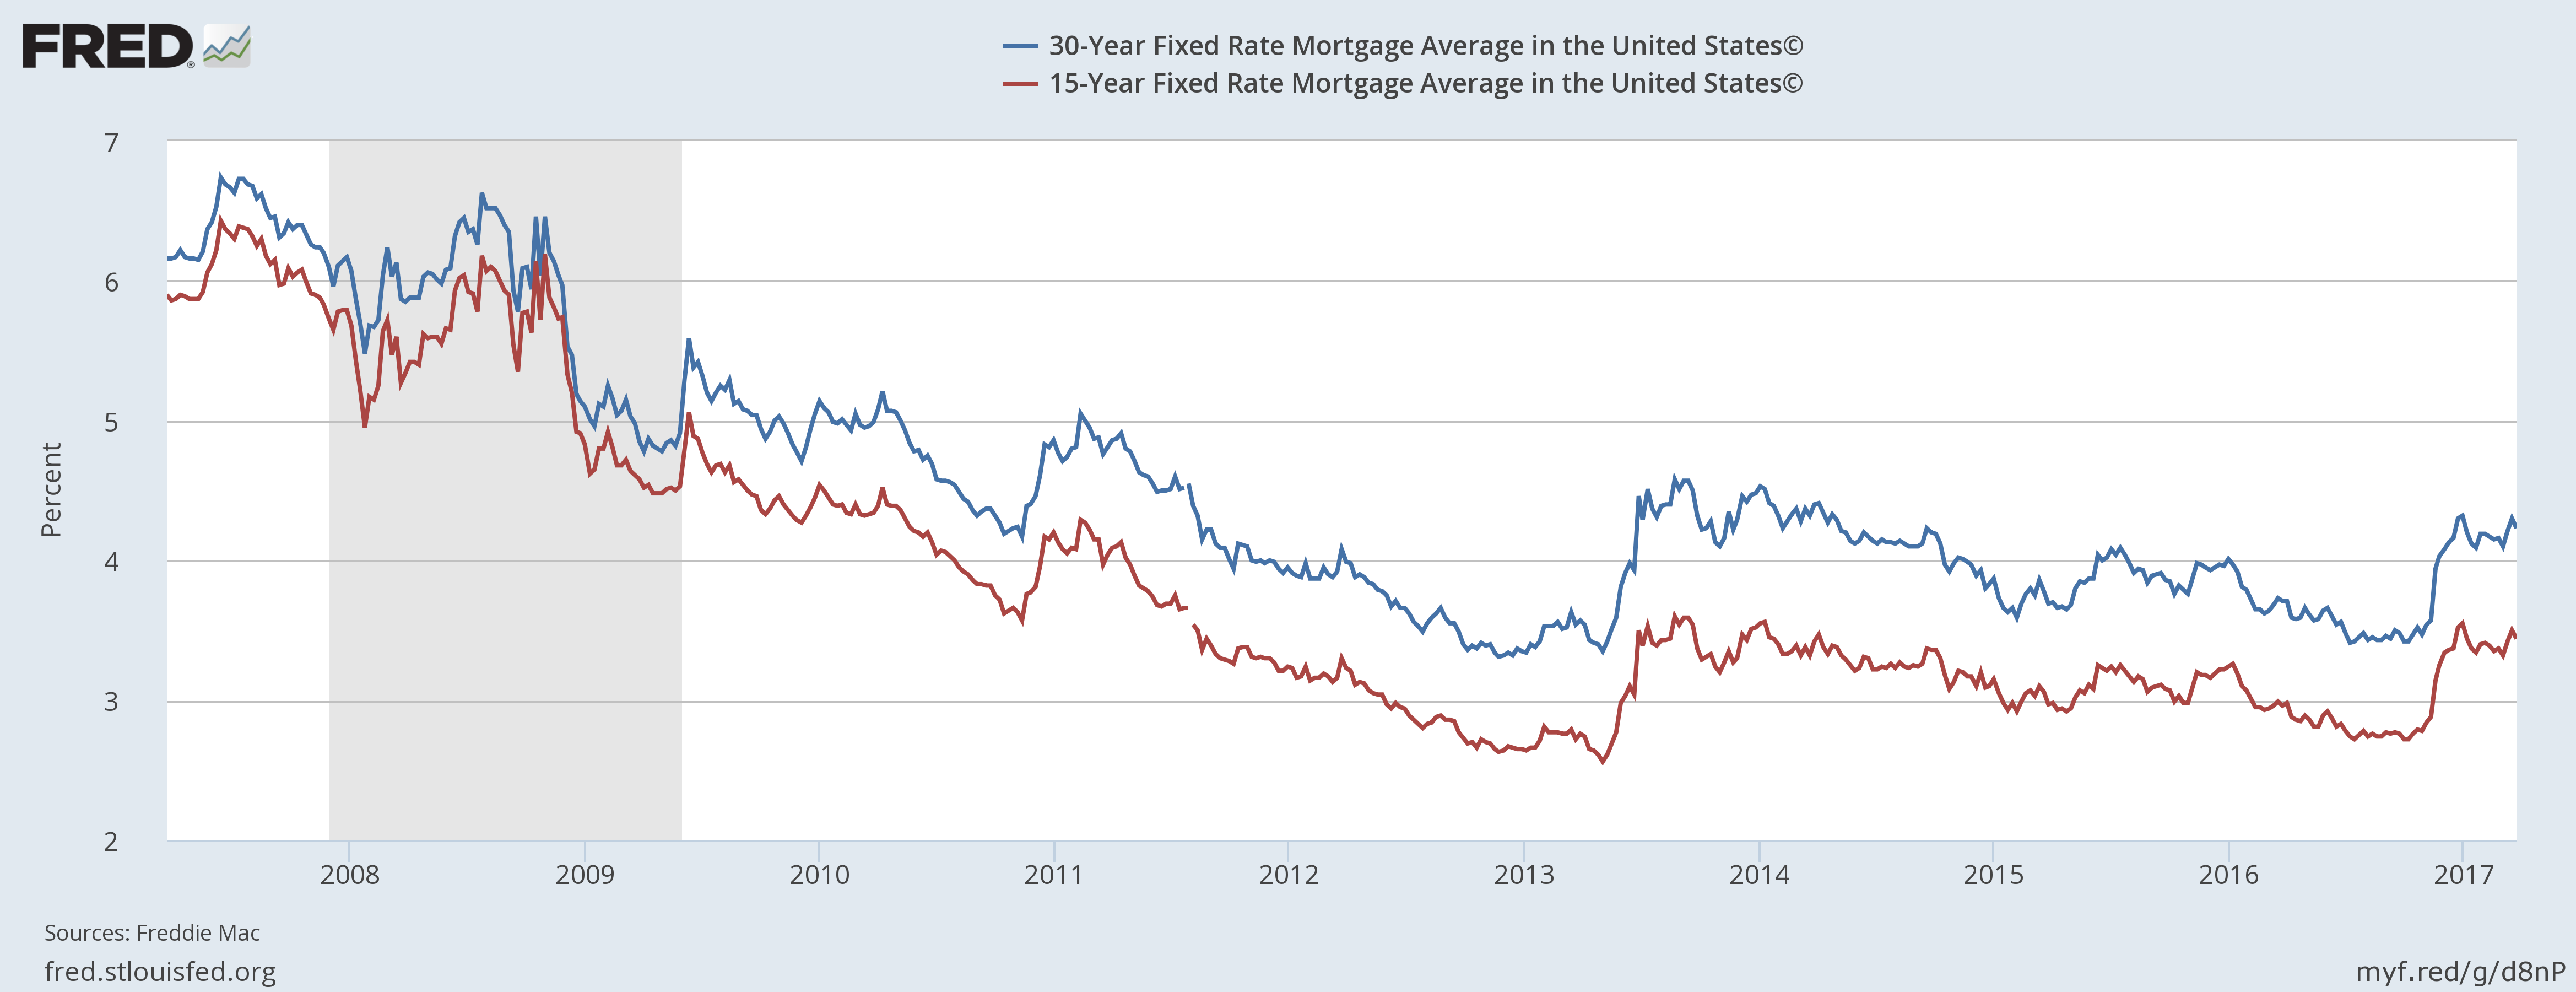 15 and 30-Year Mortgage Rate: 2008-2017